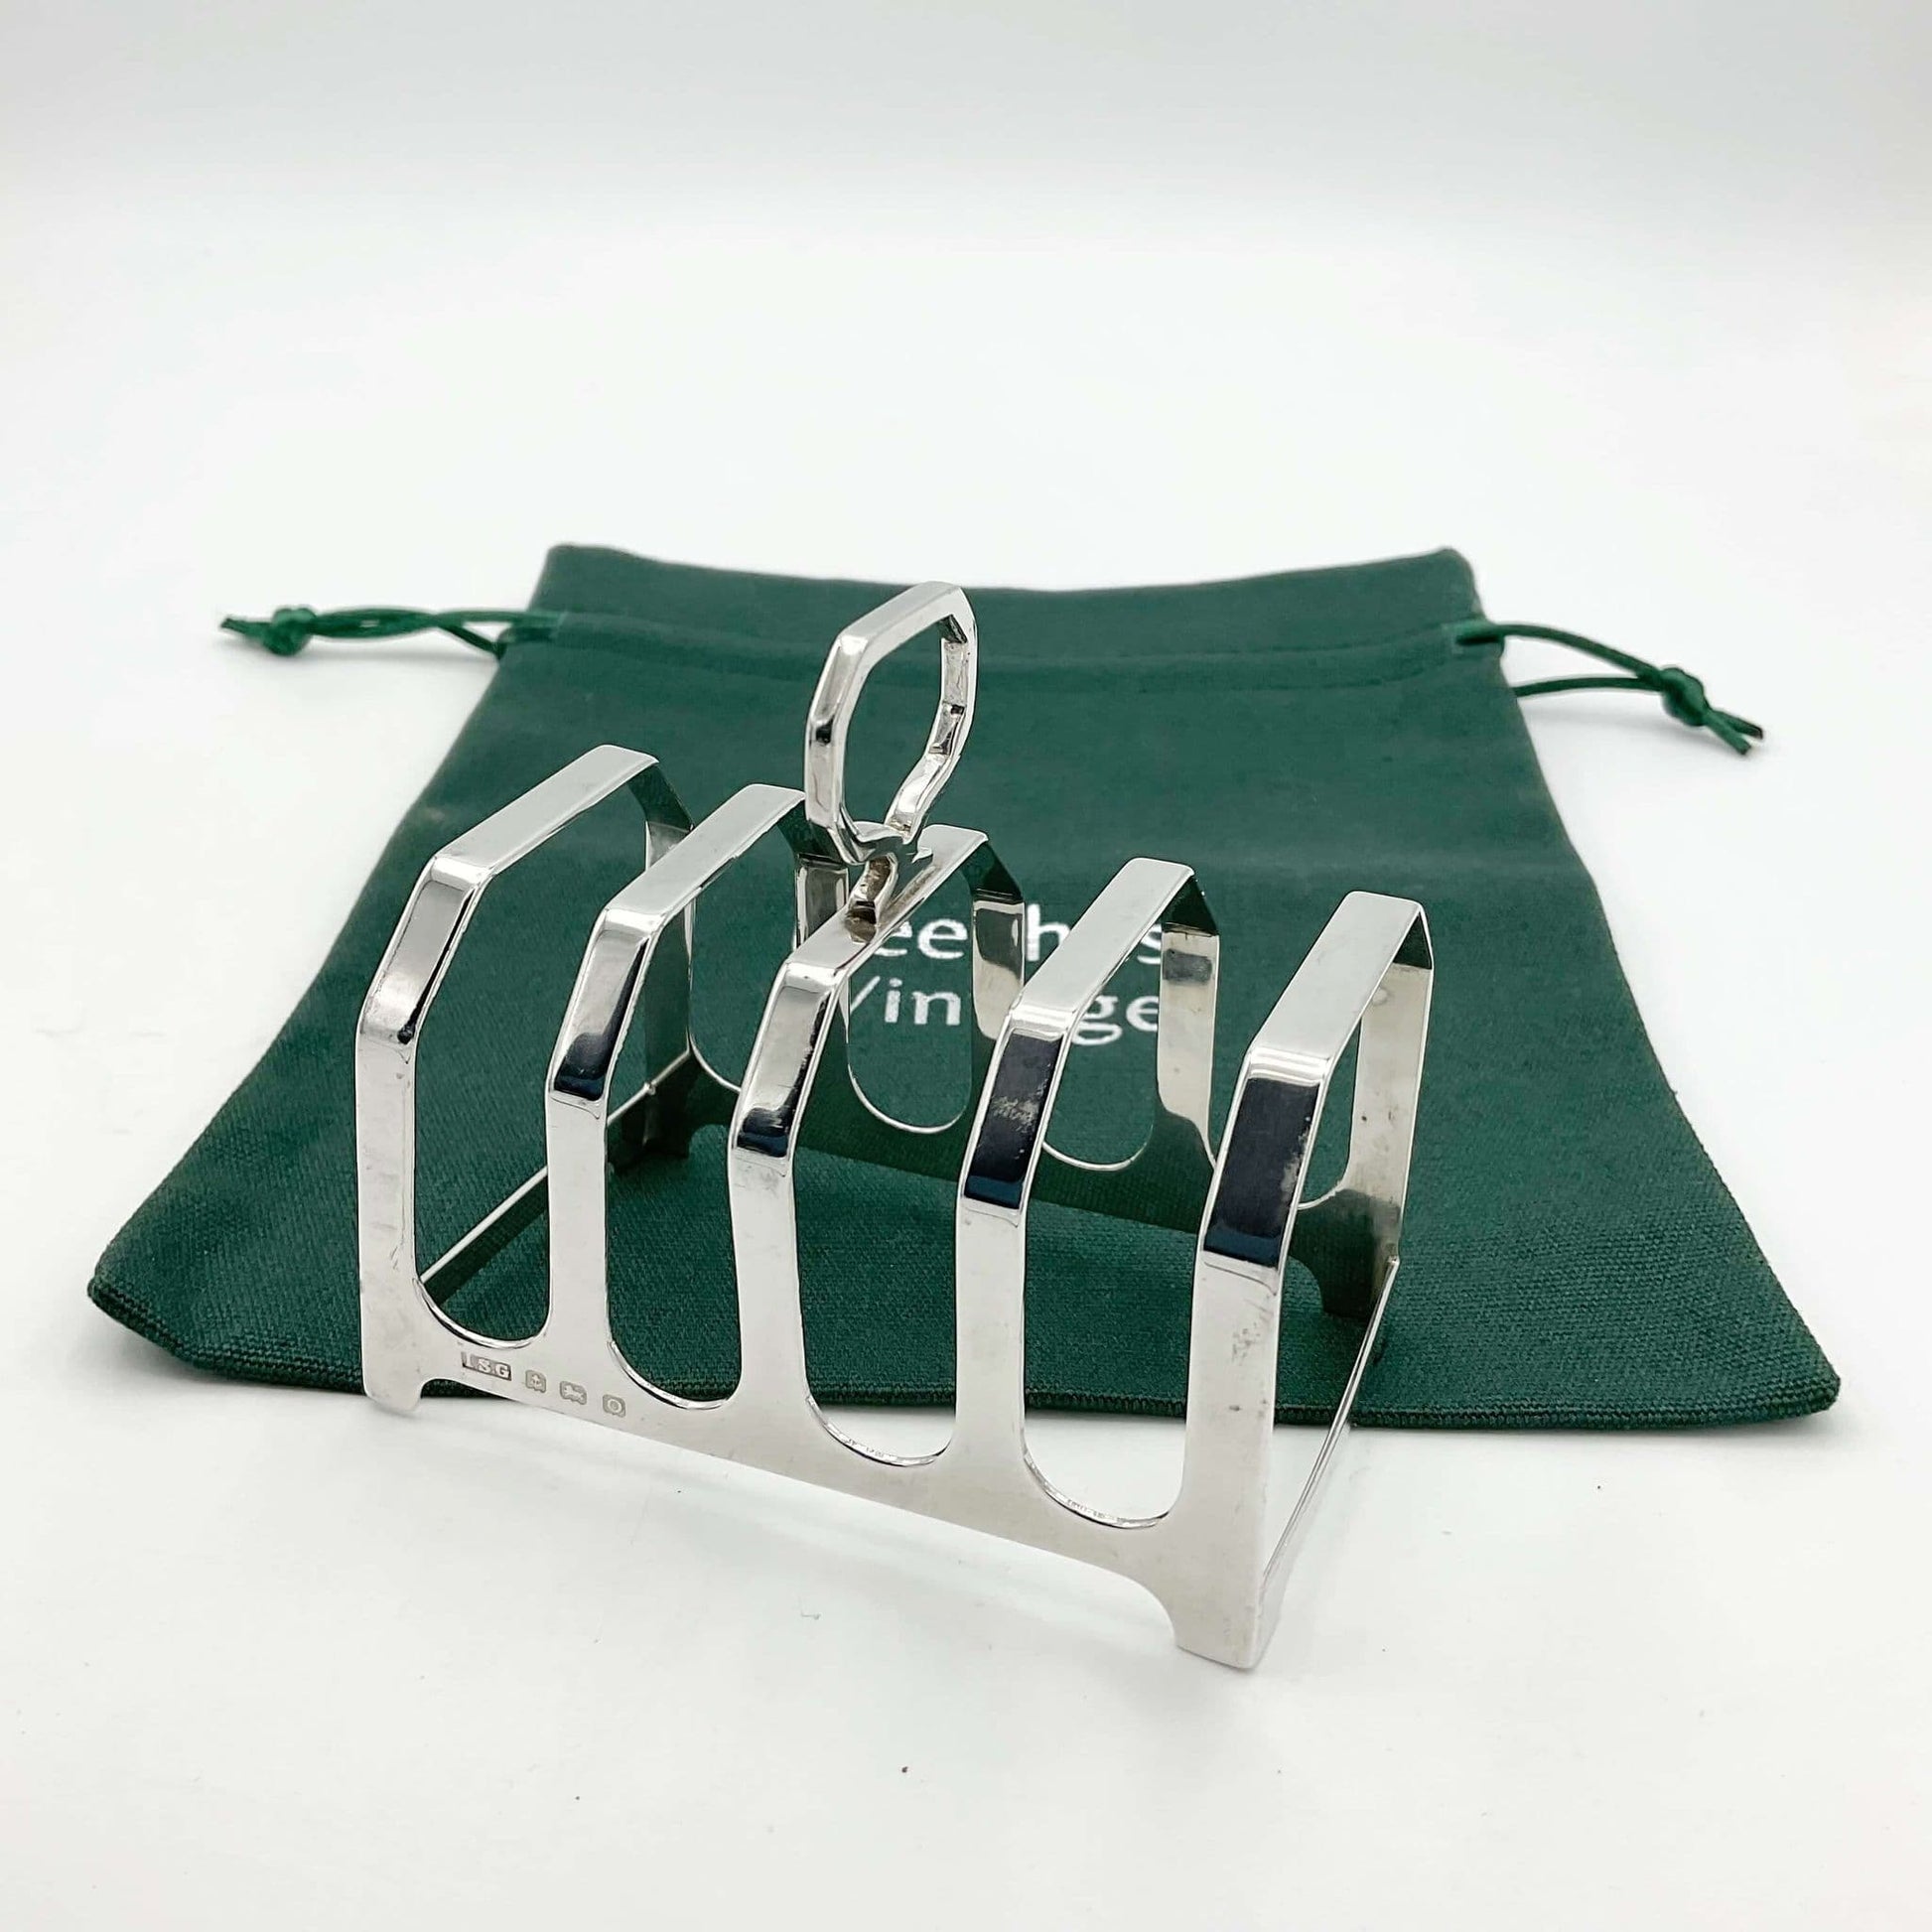 Pretty antique art deco style silver toast rack on a green cotton bag